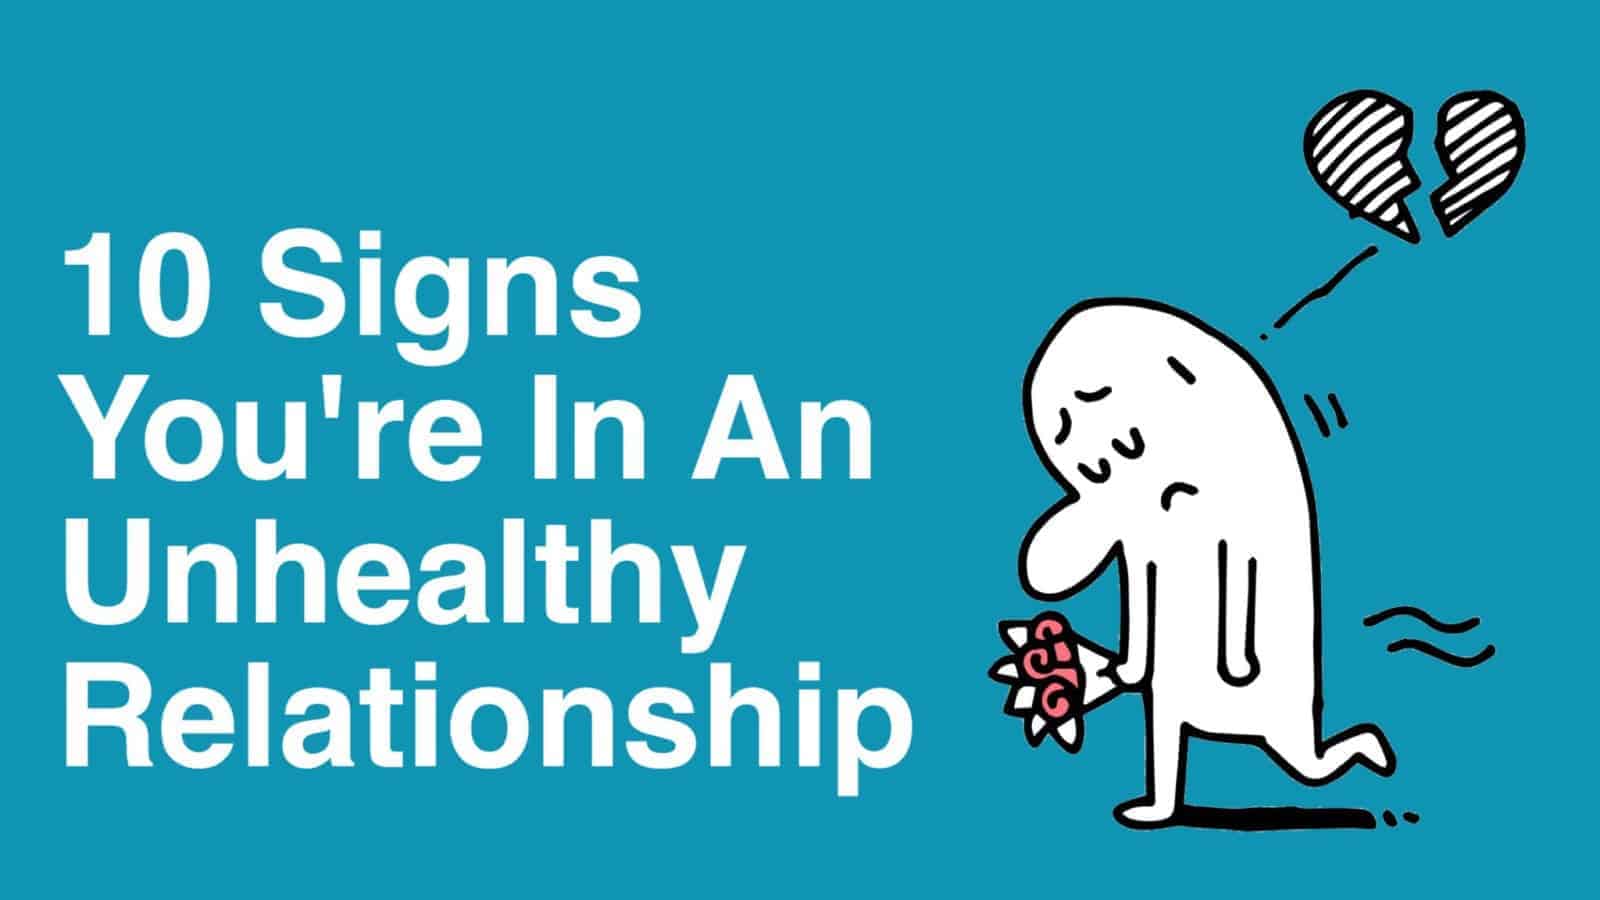 10 Signs You’re In An Unhealthy Relationship